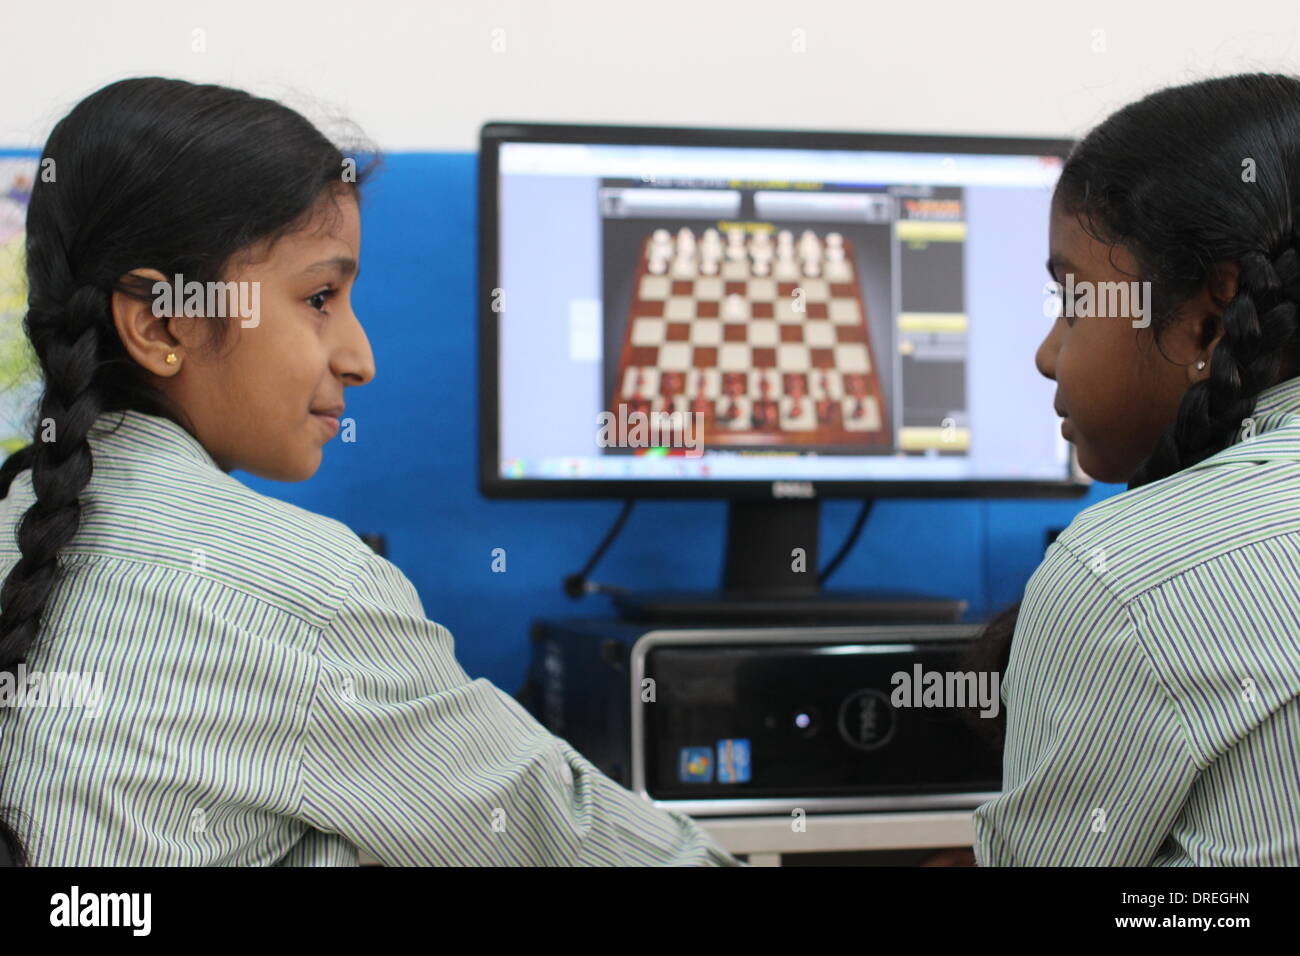 Nodia, India. 30th Oct, 2013. Two fifth graders sit in front of a computer playing an online game of chess with other pupils from across the country at the Global Indian International School in Nodia, India, 30 October 2013. Chess is becoming increasingly popular in India, since Viswanathan Anand became the first Indian chess master ever to win the title in 2000. Nowadays 1.65 million young Indian students are learning and practicing the game of chess in there schools as part of mental exercises lessons. Photo: Doreen Fiedler/dpa/Alamy Live News Stock Photo